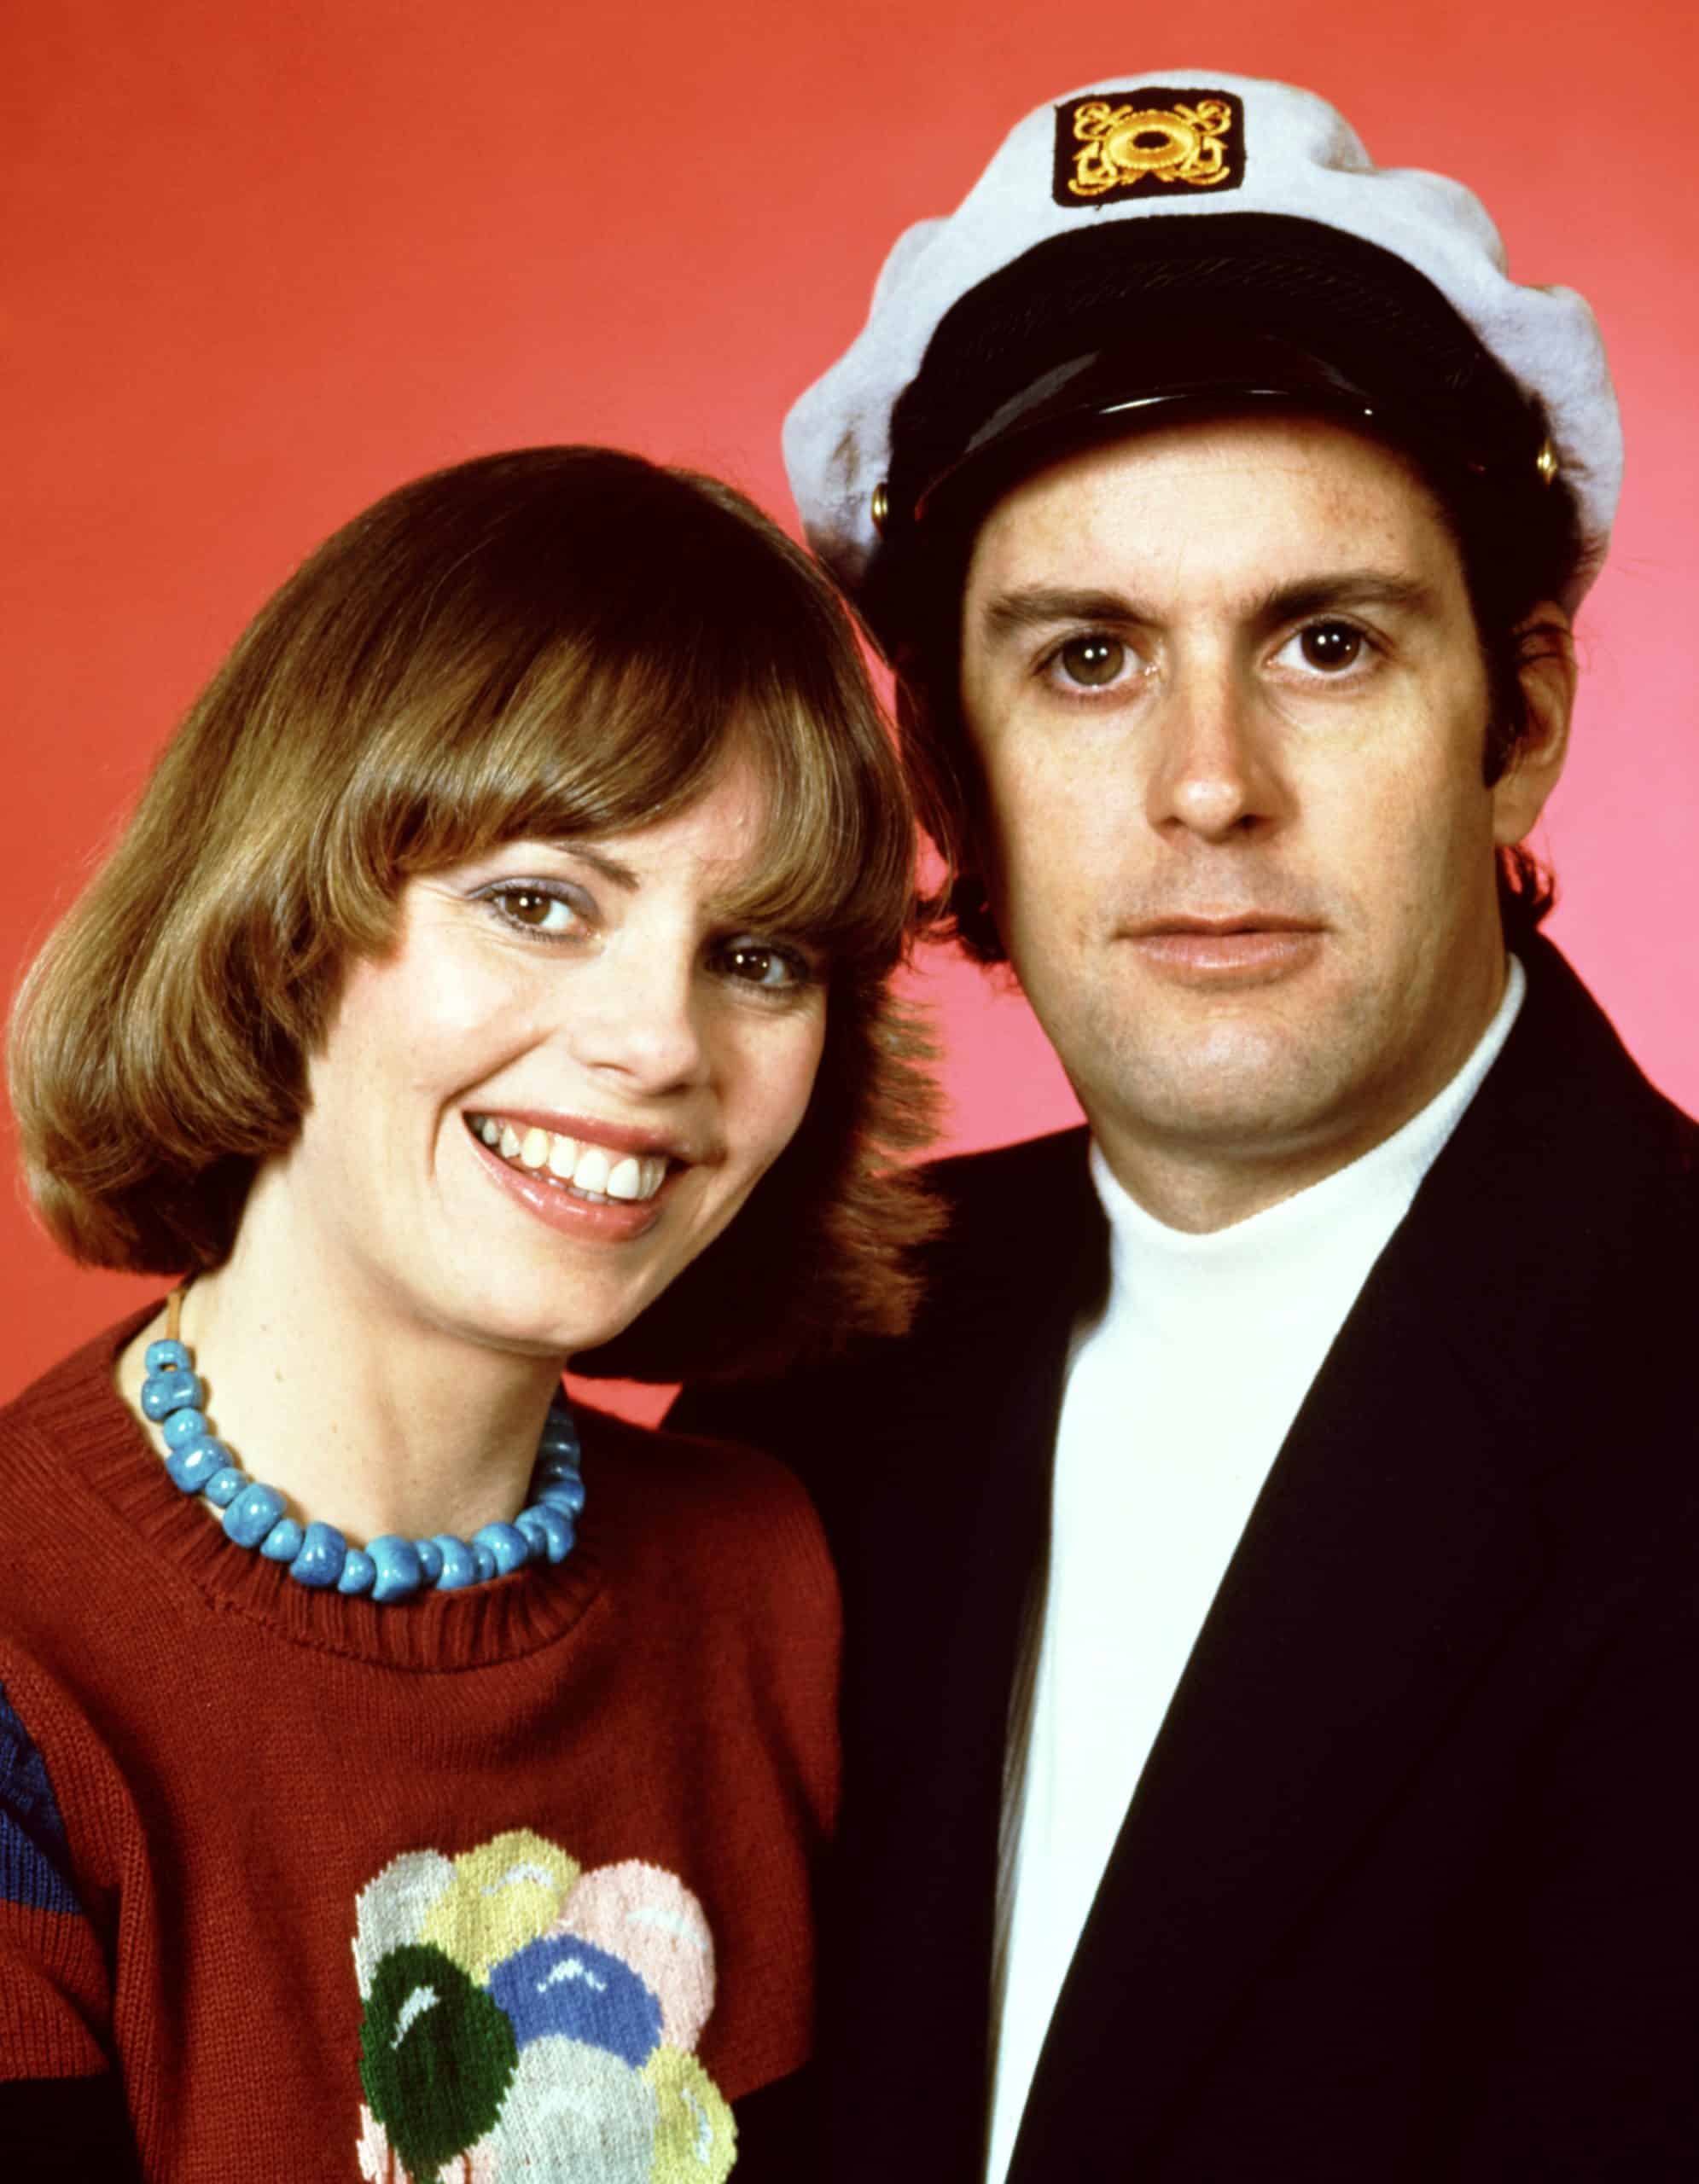 Captain and Tennille, (Toni Tennille, Daryl Dragon), ca. mid-1970s